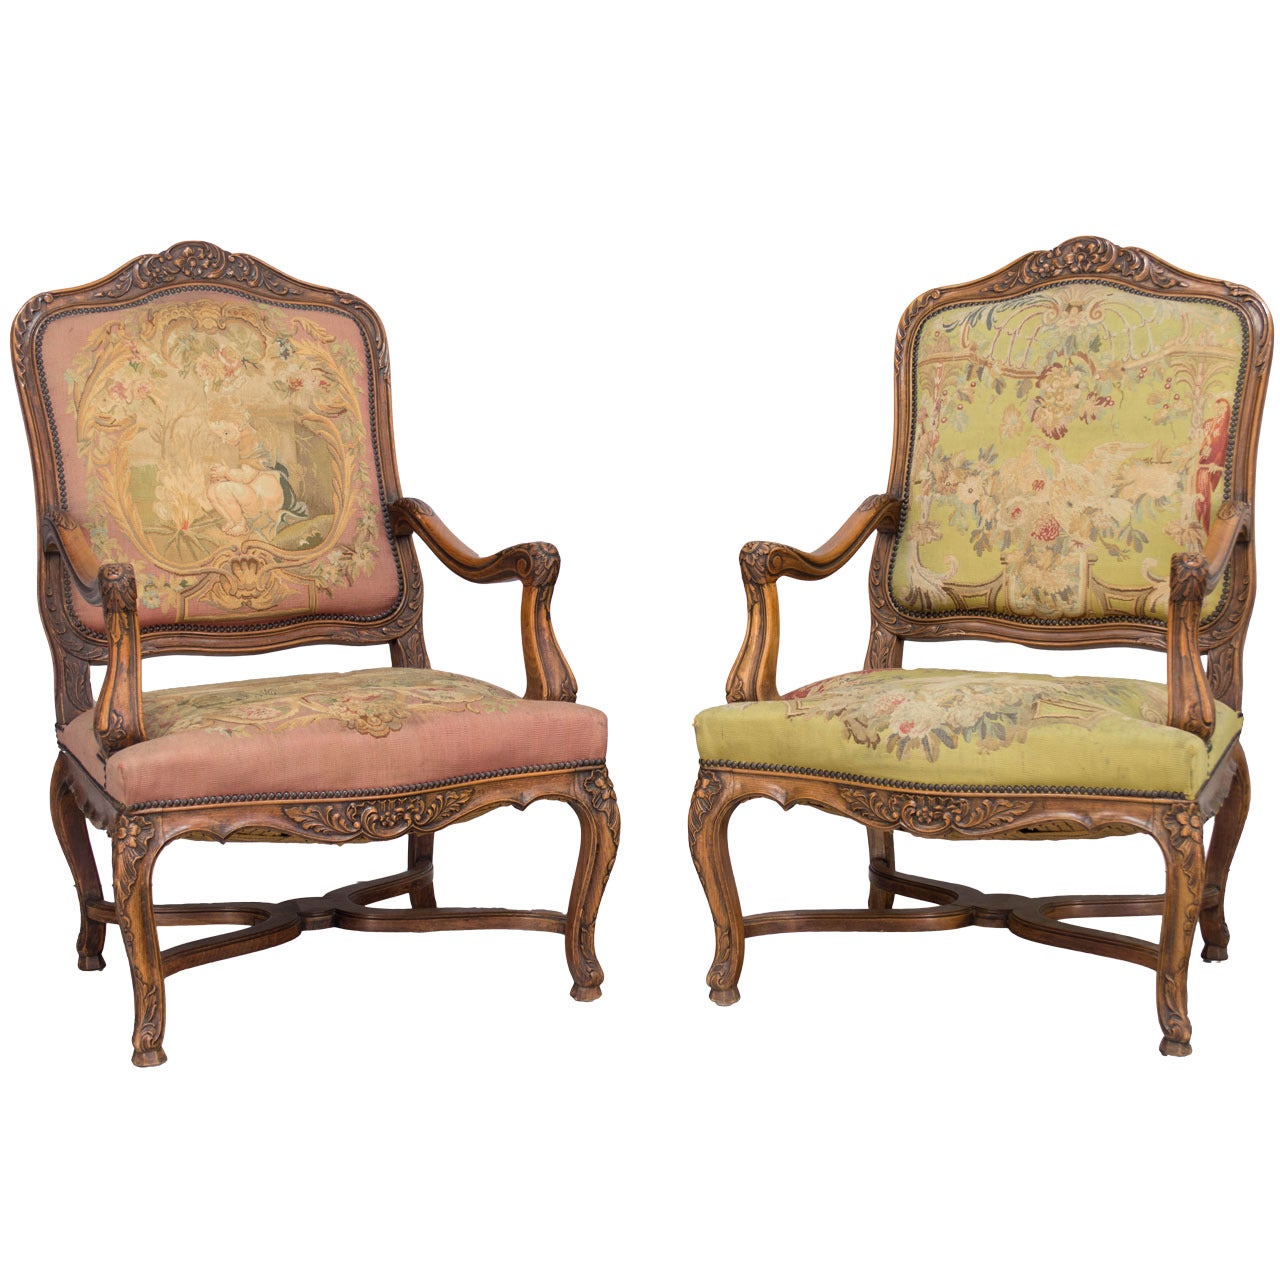 Pair of 19th c. French Louis XV Style Fauteuils Armchairs